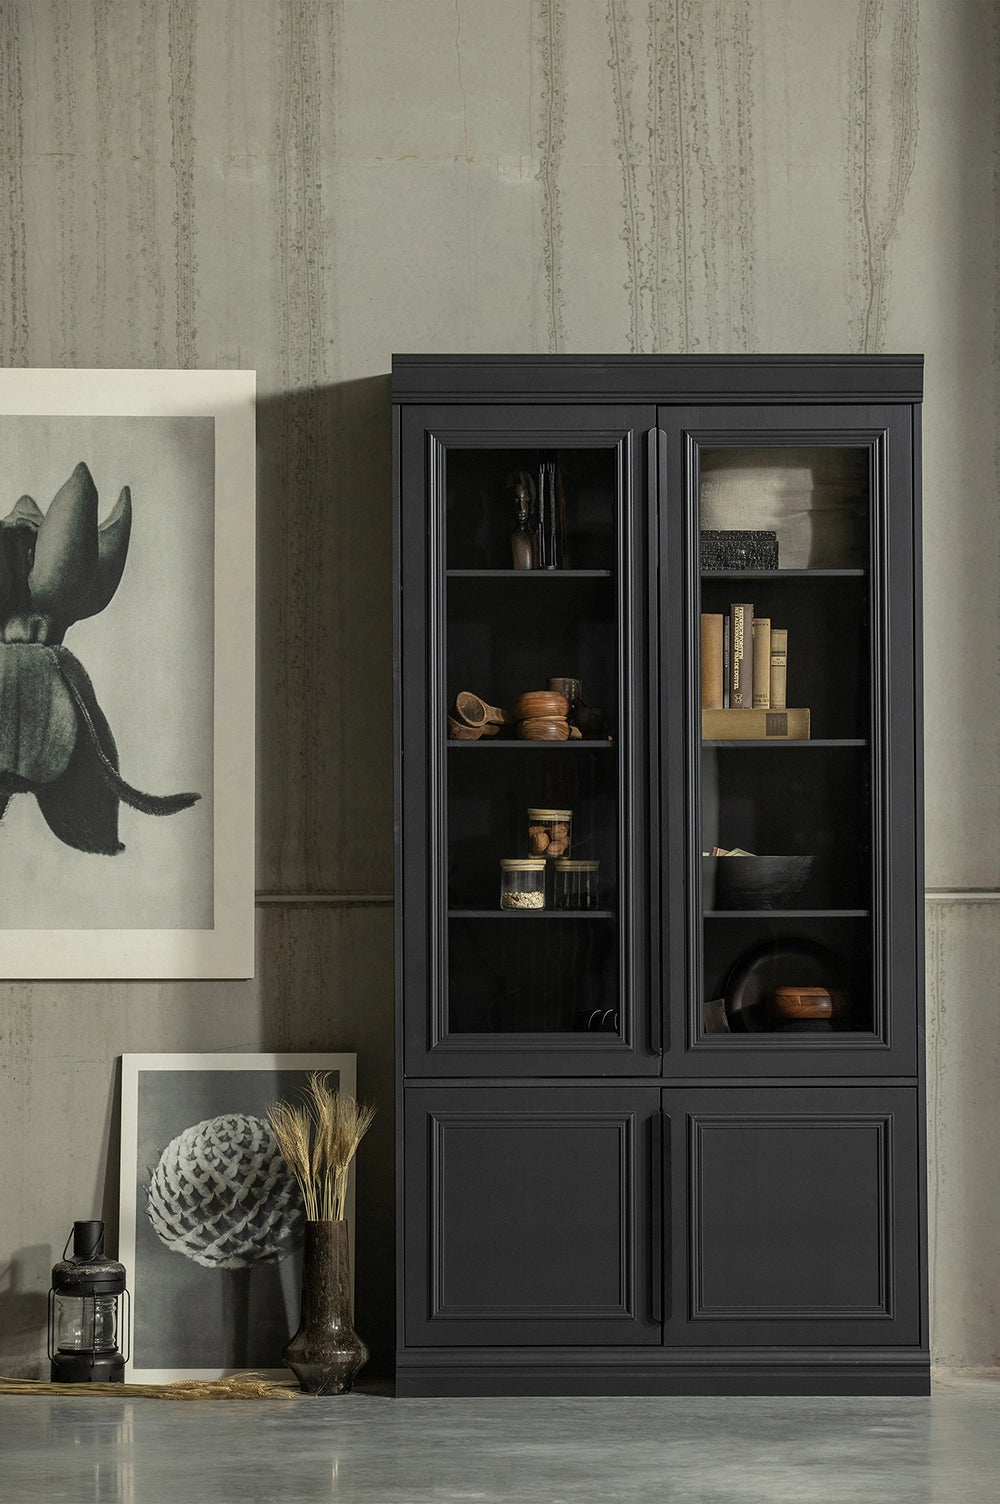 Maca Display Cabinet in Matte Black Finish with Condiments and Wall Frame in Living Room Setting